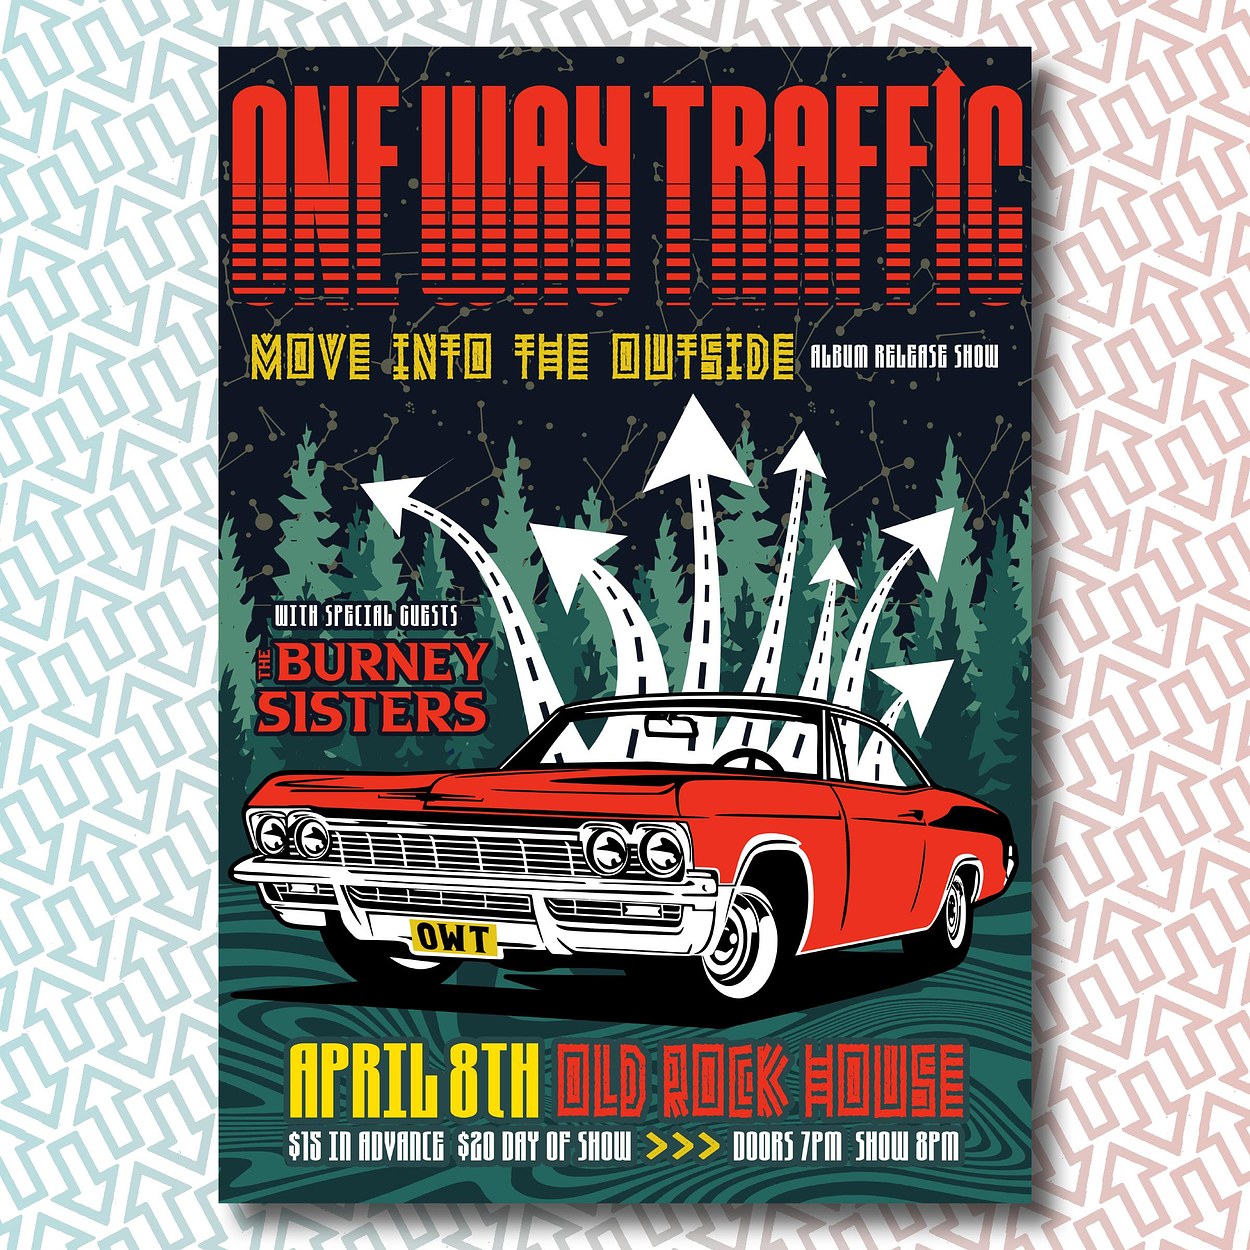 One Way Traffic - Move Into The Outside Record Release Show Poster